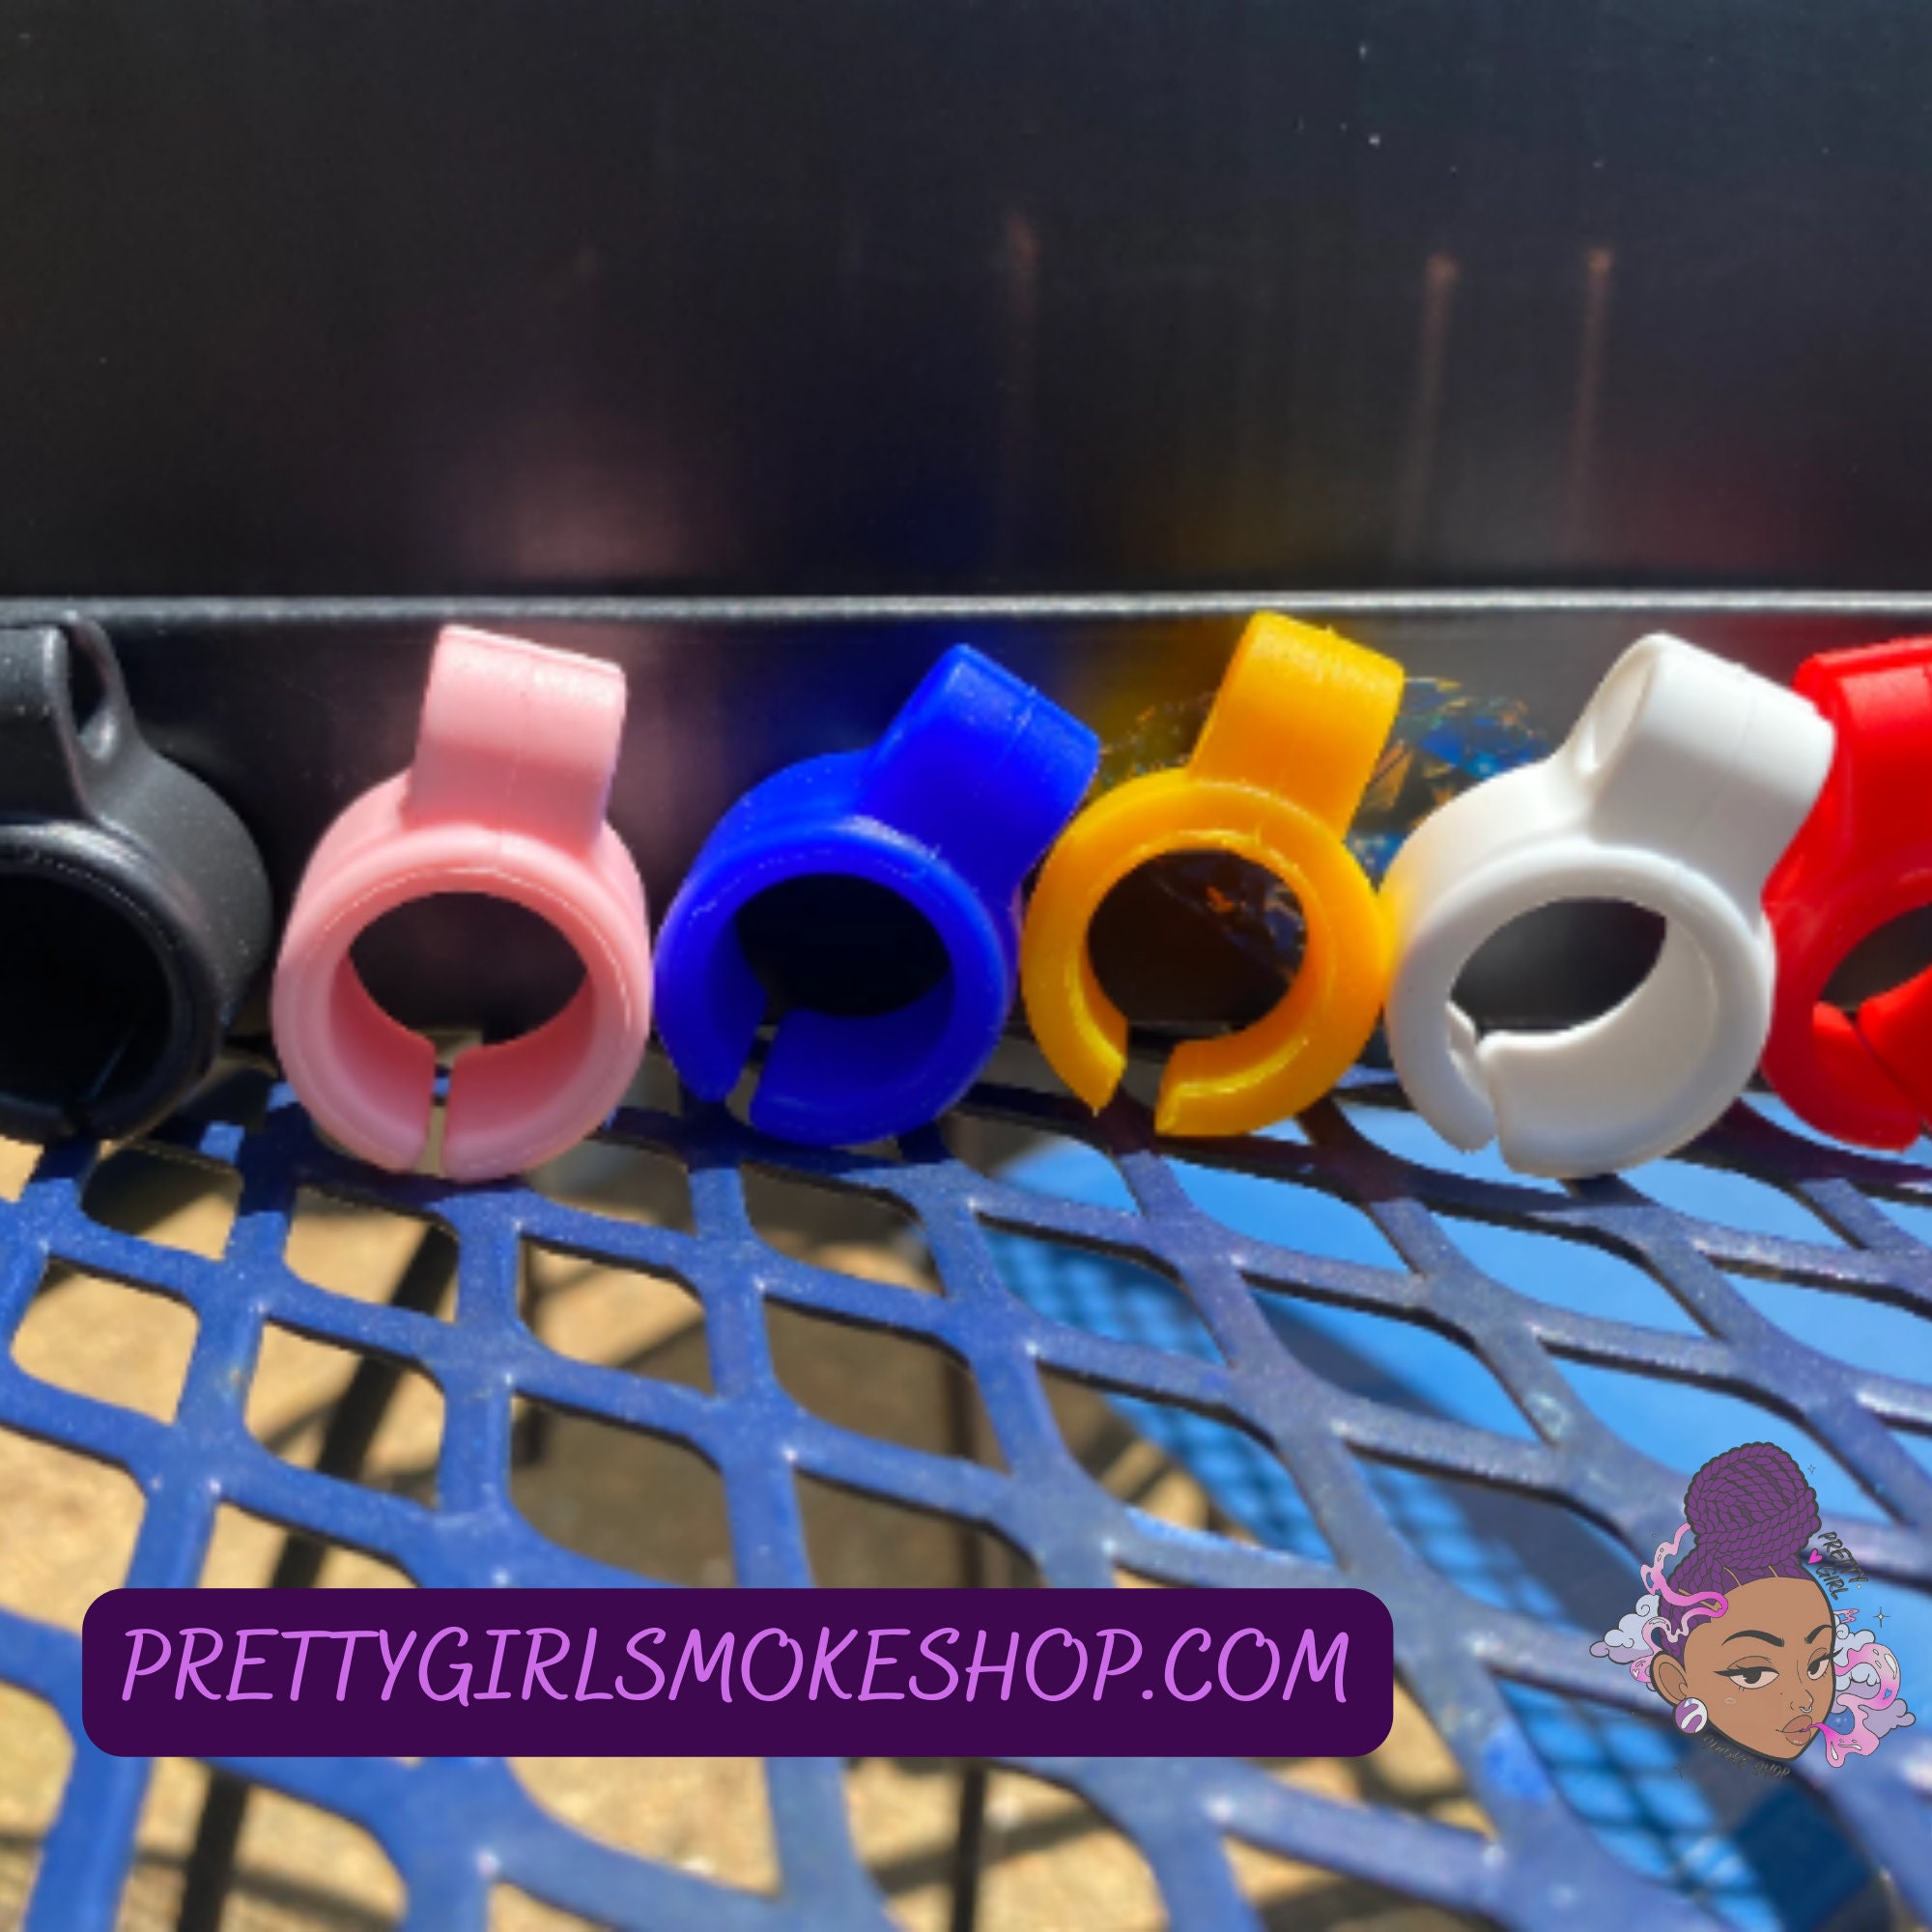 SMOKEA Silicone Joint Holder Ring